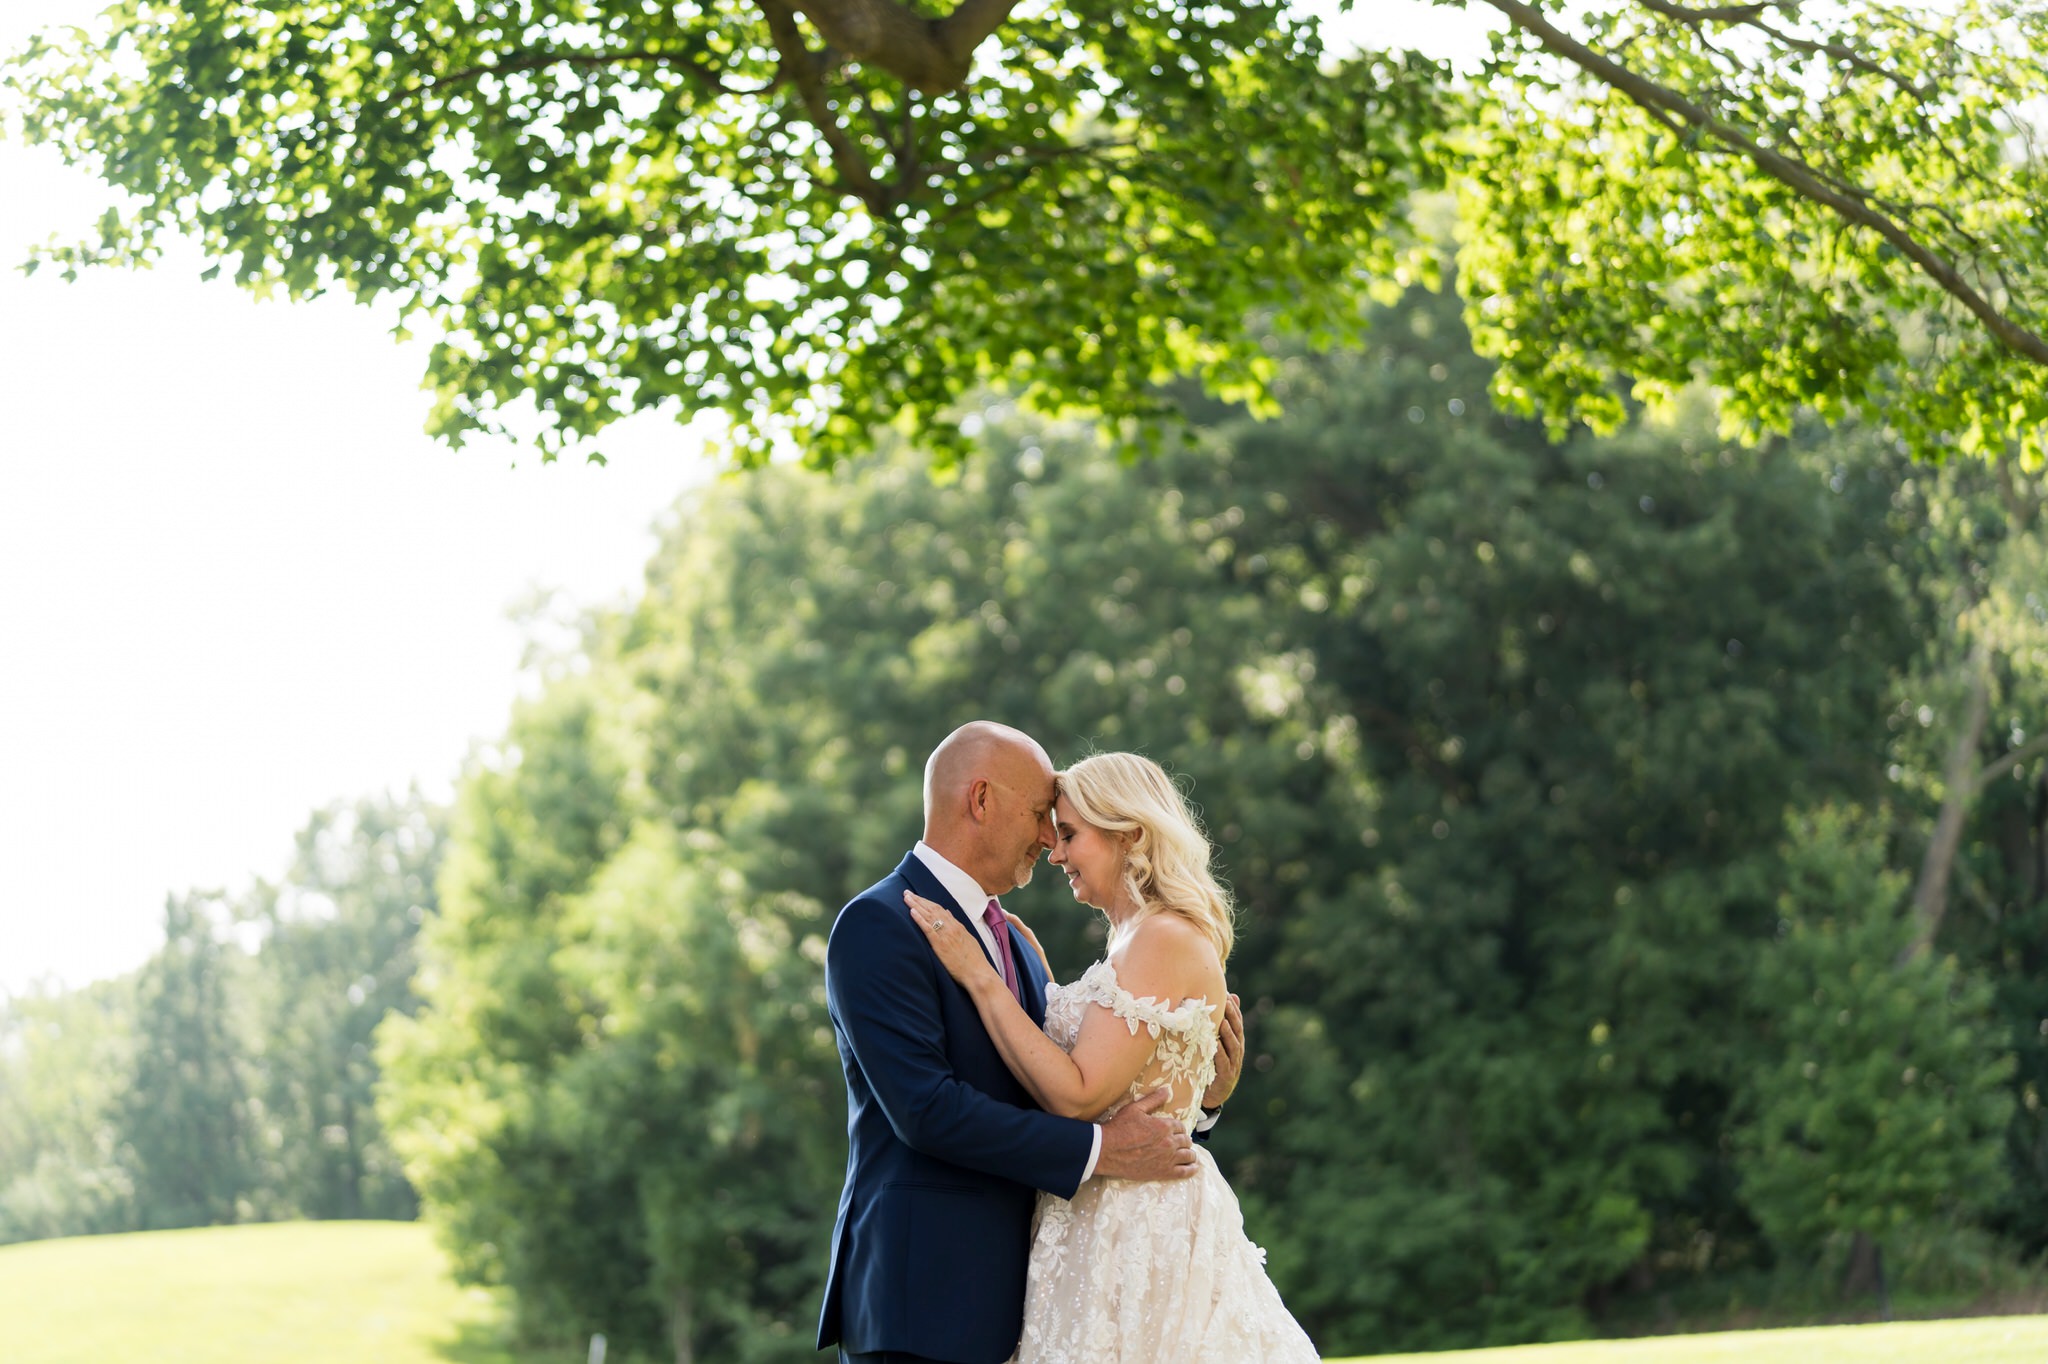 Standing under a tree, a bride and groom embrace on their wedding day at Meadow Brook Hall.  